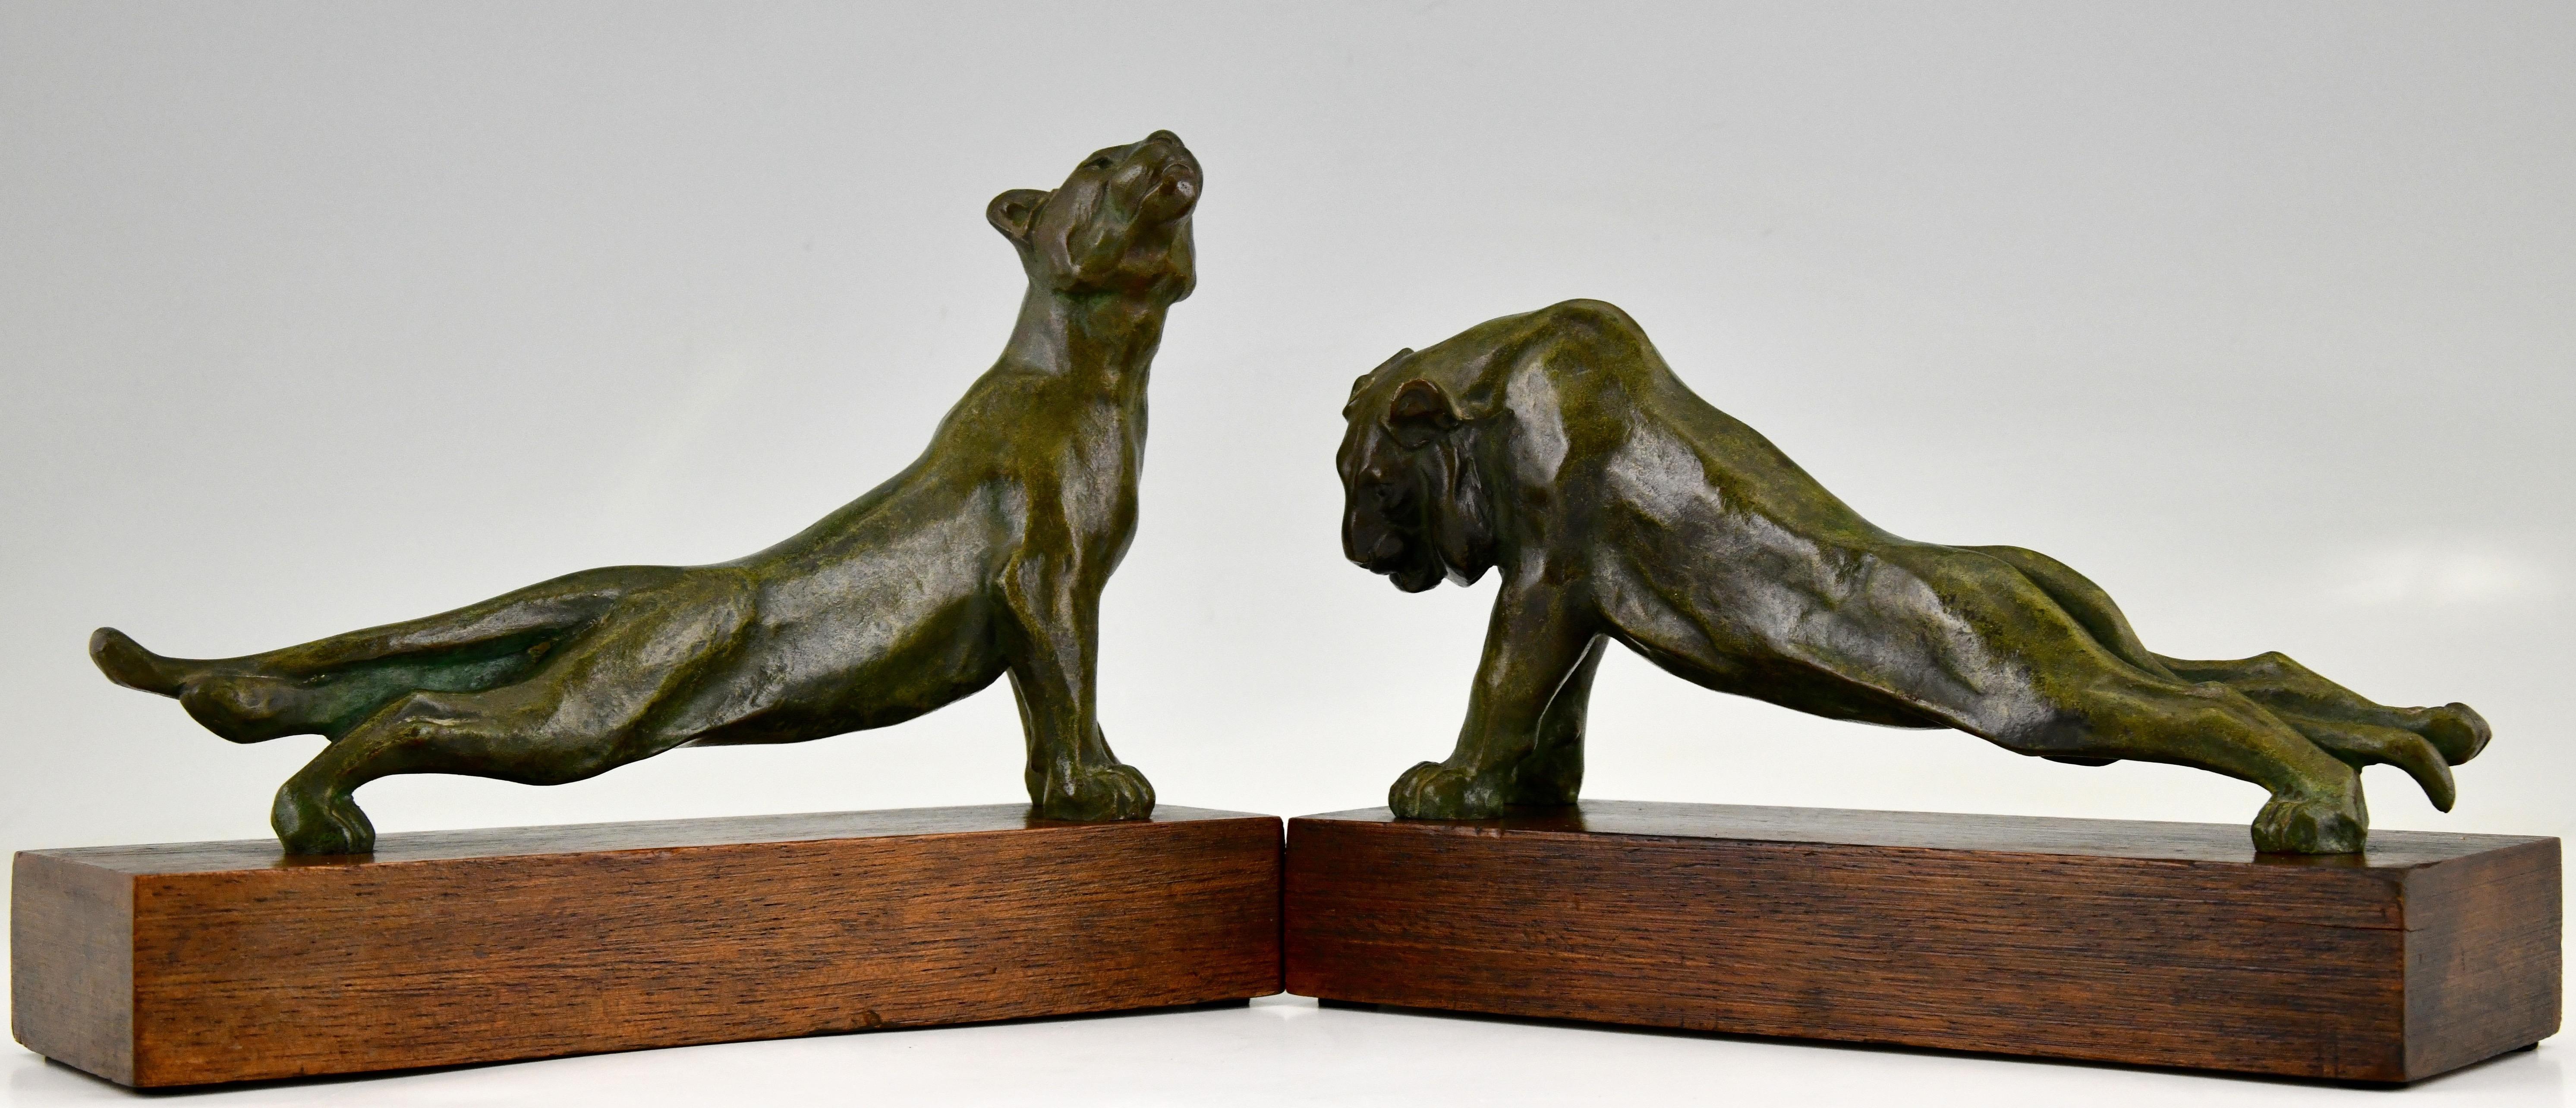 Swiss Art Deco Bronze Bookends Panther and Tiger by Oscar Waldmann, 1925 For Sale